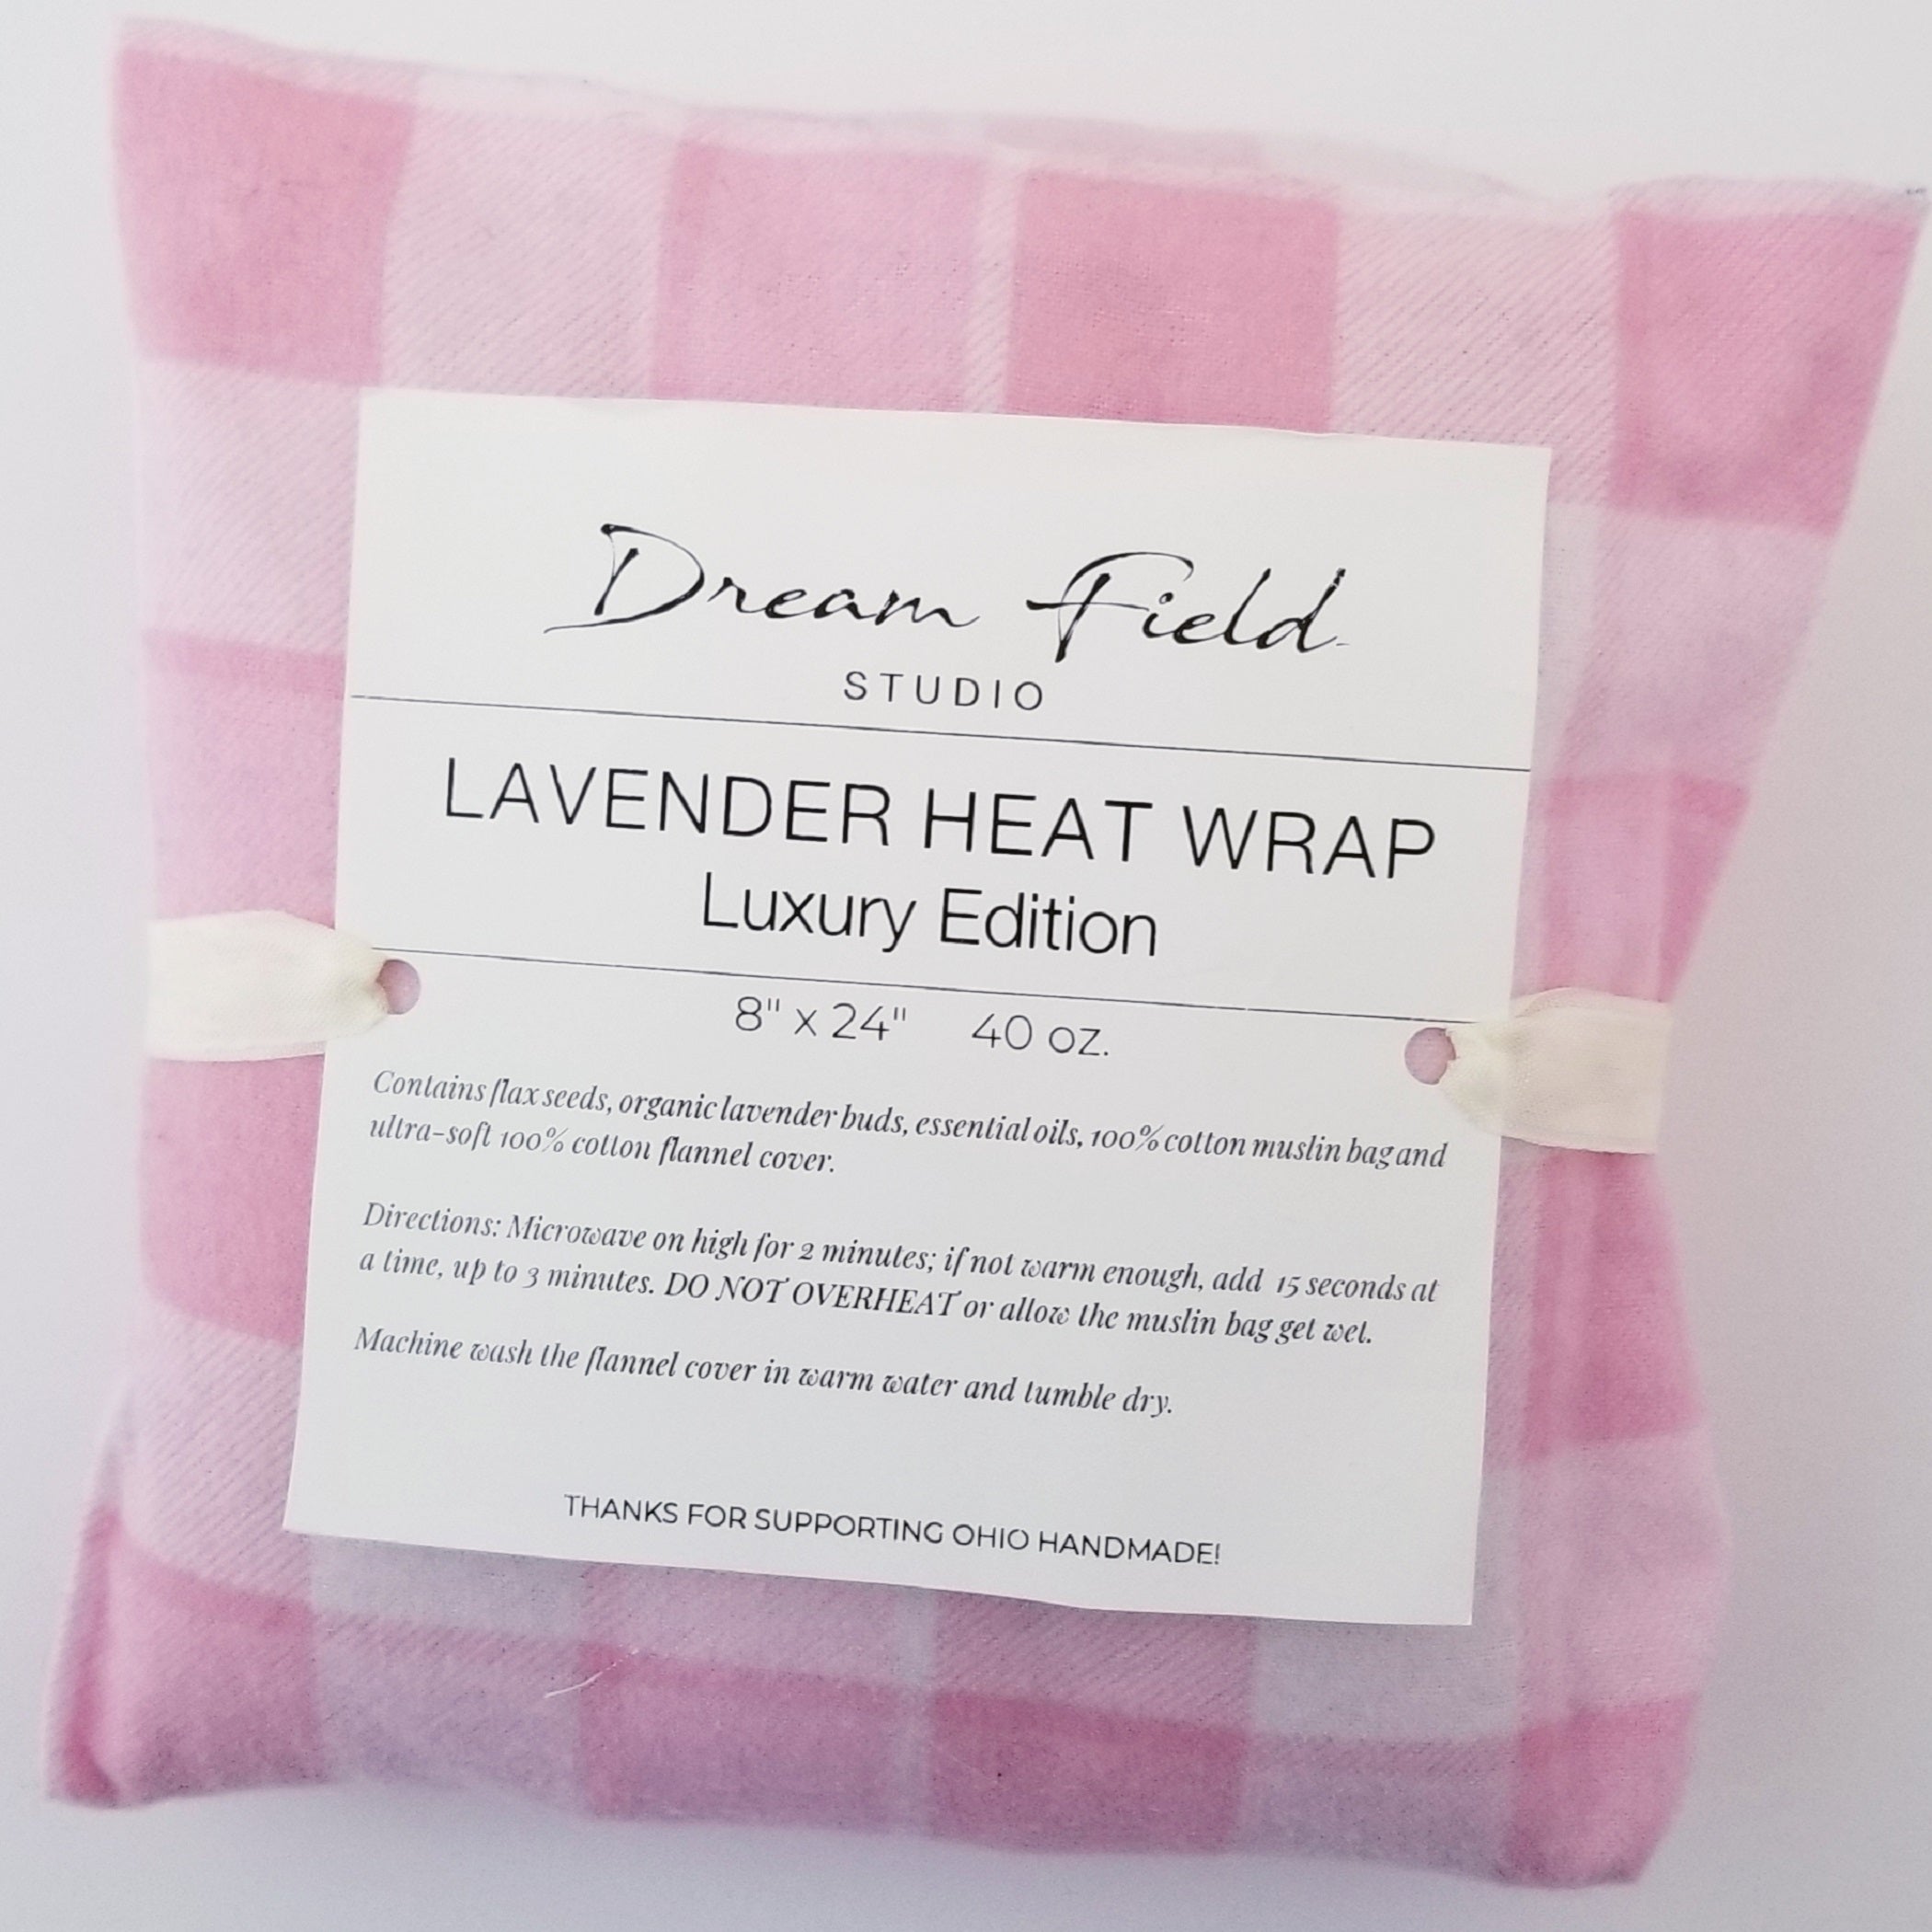 lavender heat wrap luxury edition with Dream Field label folded up